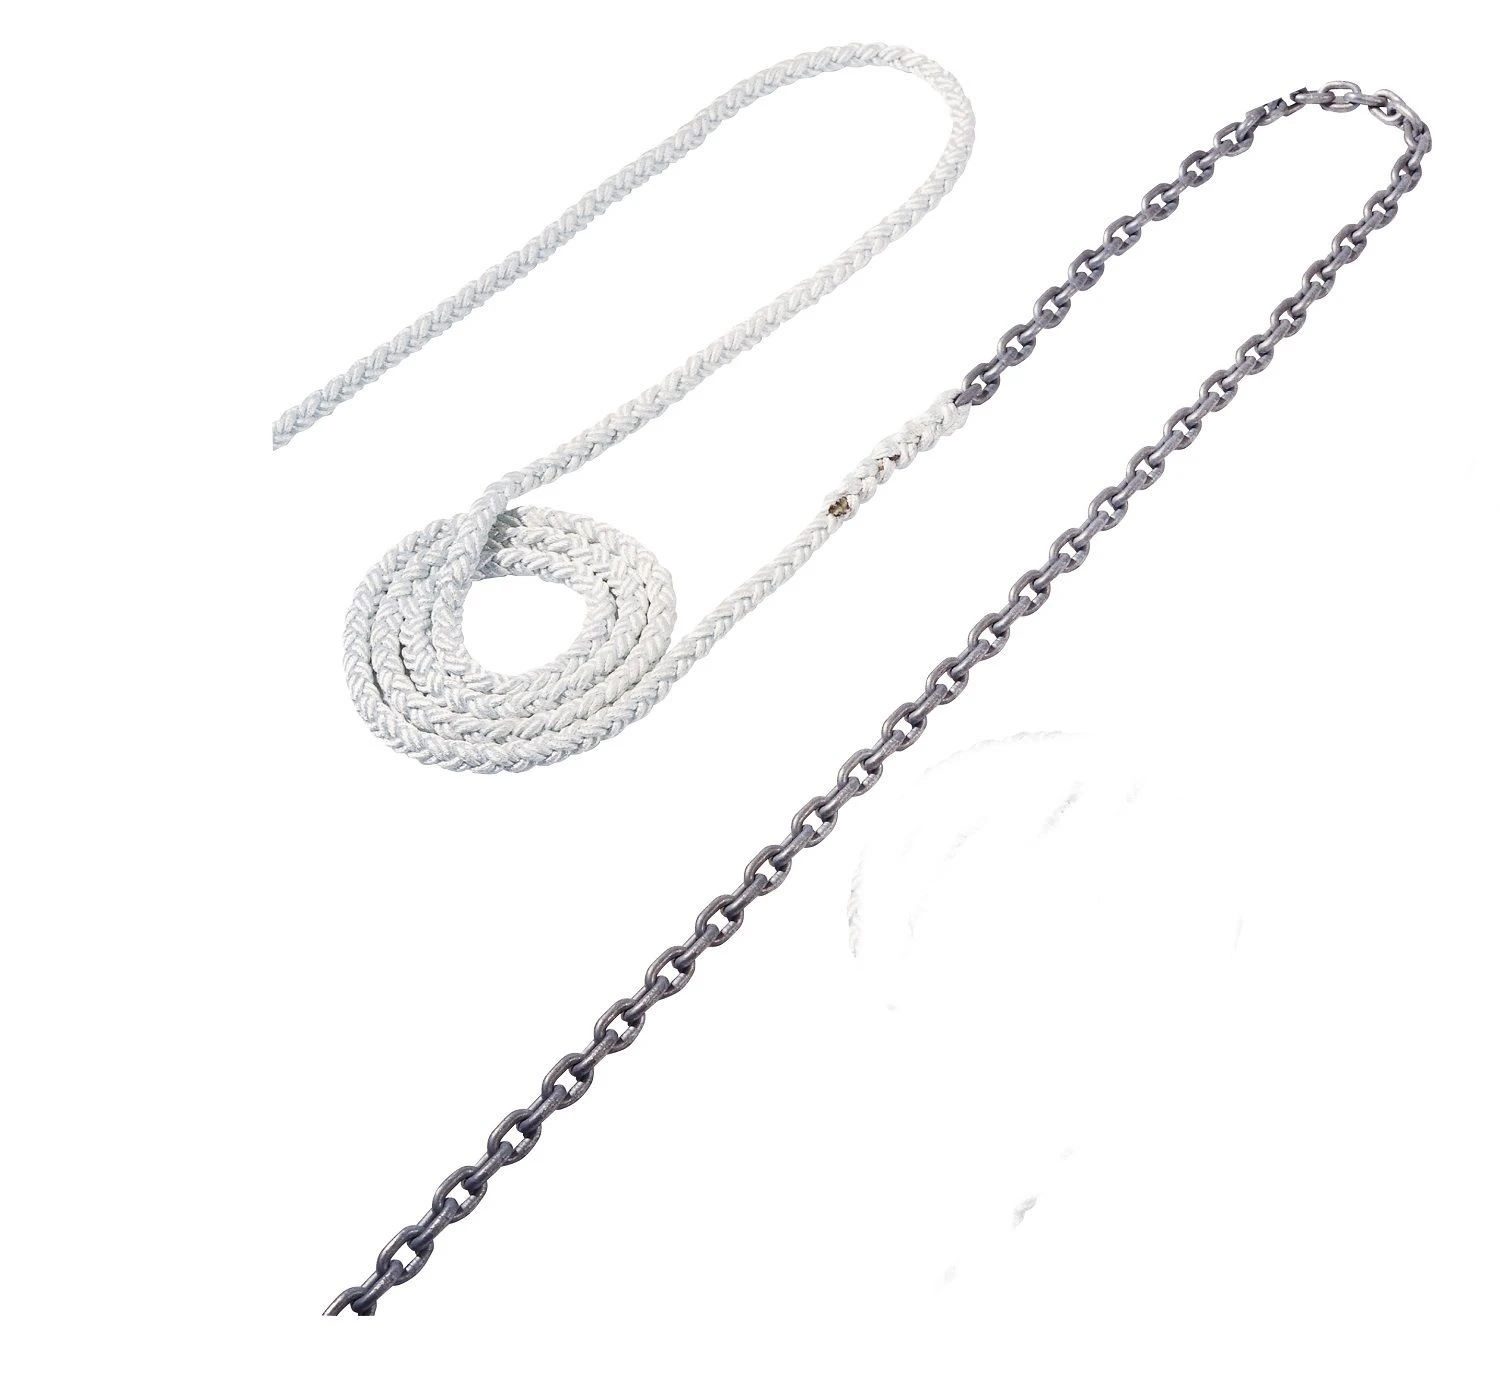 Best anchor chain? Maxwell anchor ropes and chains for boats